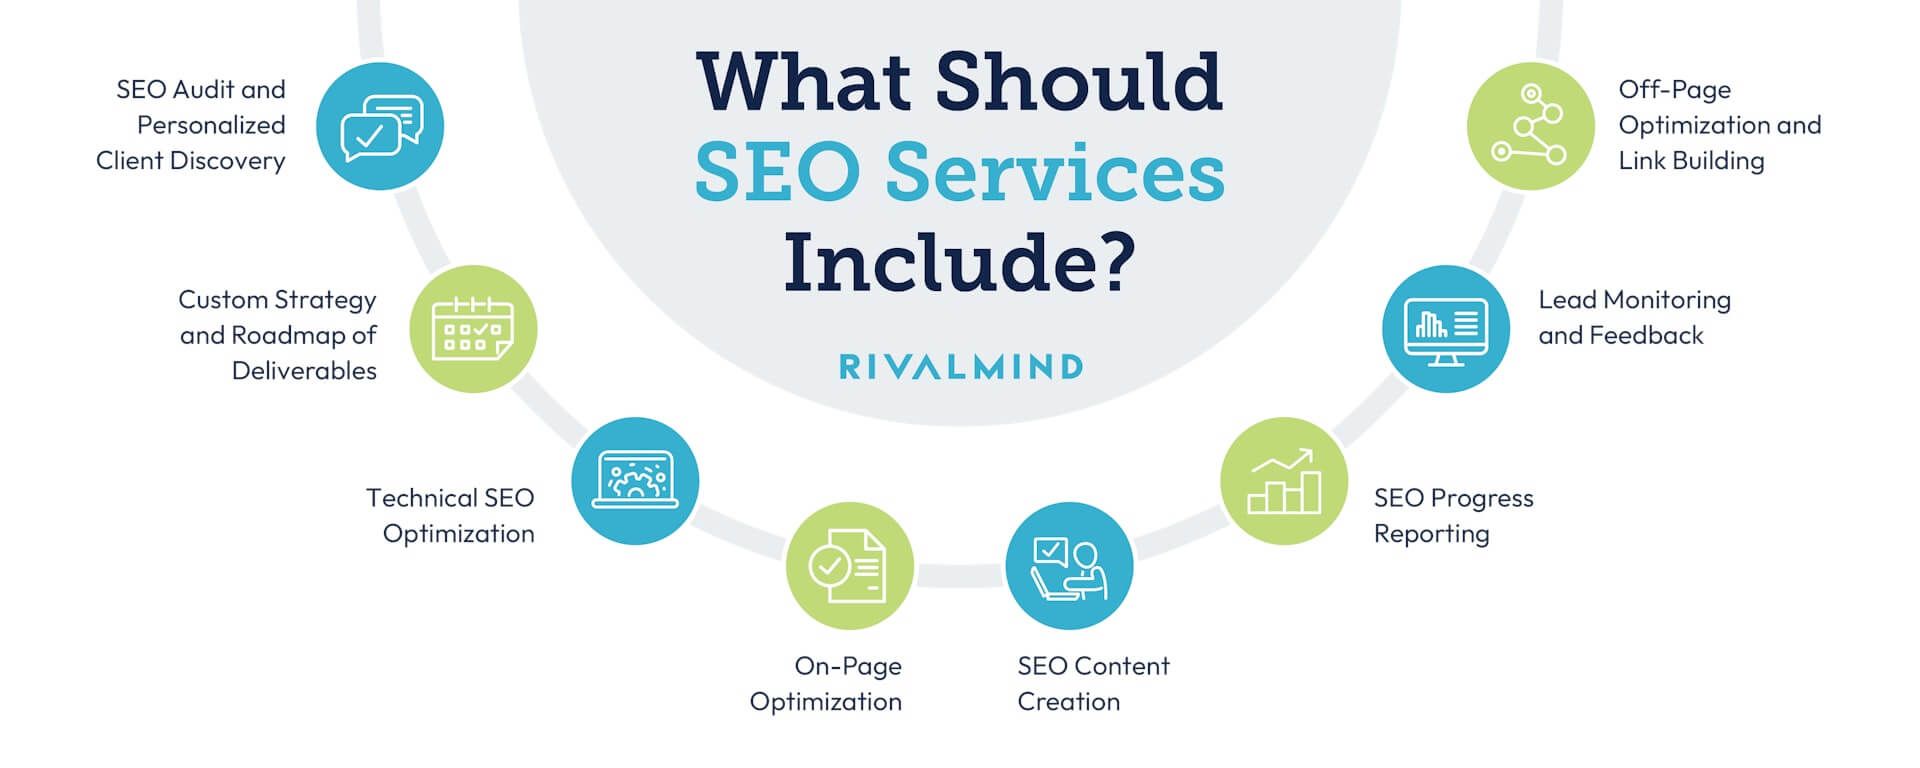 an Infographic detailing 9 things every SEO service should include: an SEO audit, a customized strategy with deliverables, technical SEO optimization, on-page SEO optimization, SEO content creation, SEO progress reporting, Lead monitoring, Off Page SEO Optimizations and link building